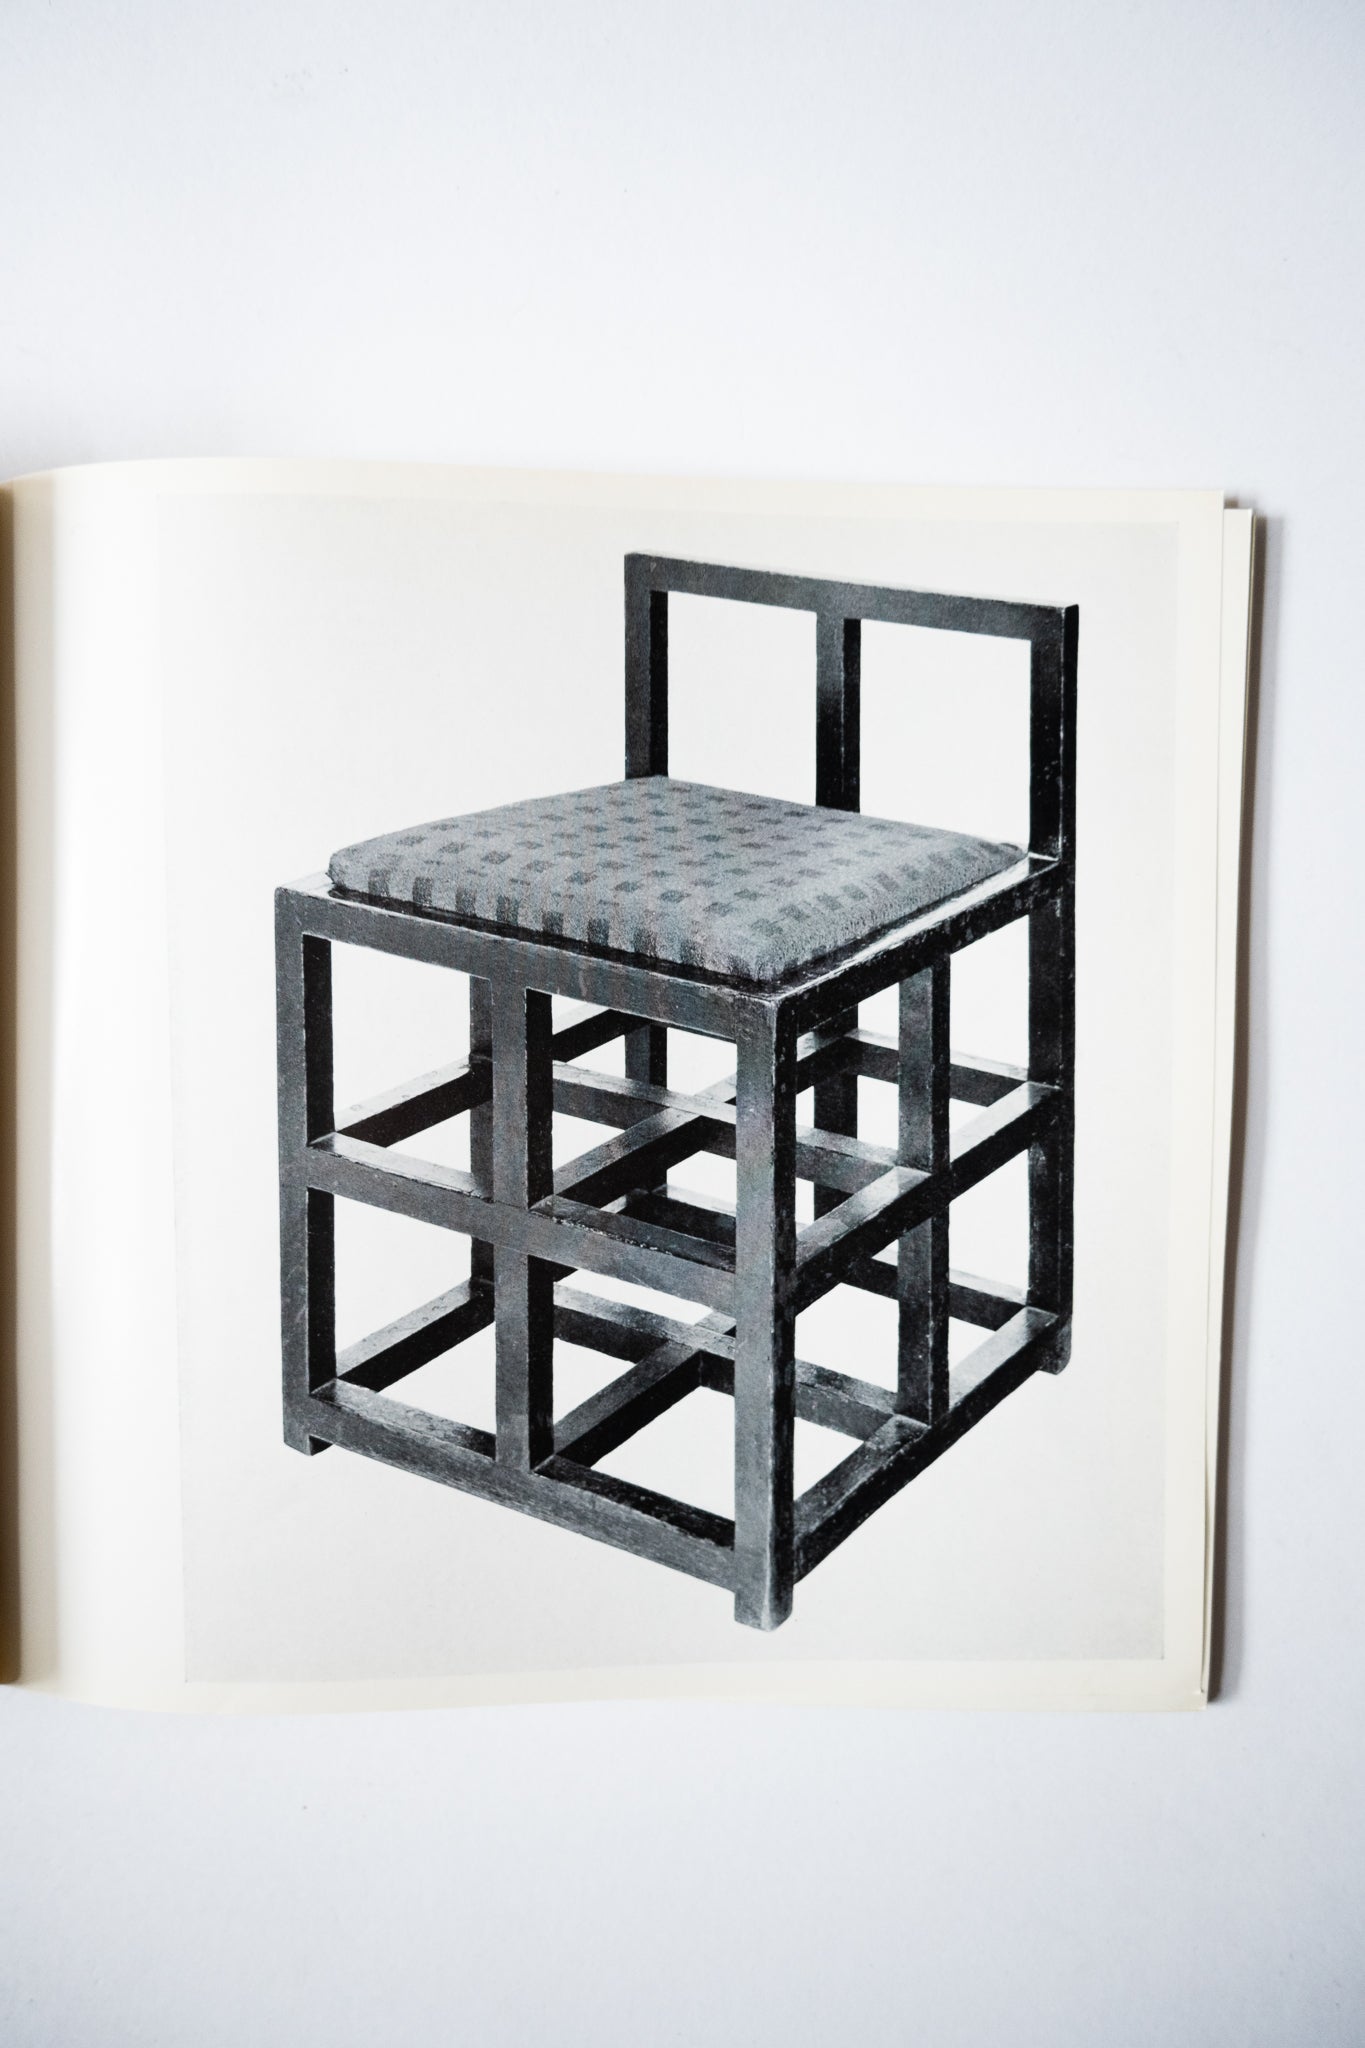 Some Examples of Furniture by Charles Rennie Mackintosh: In The Glasgow School of Art Collection, Glasgow School of Art, 1968